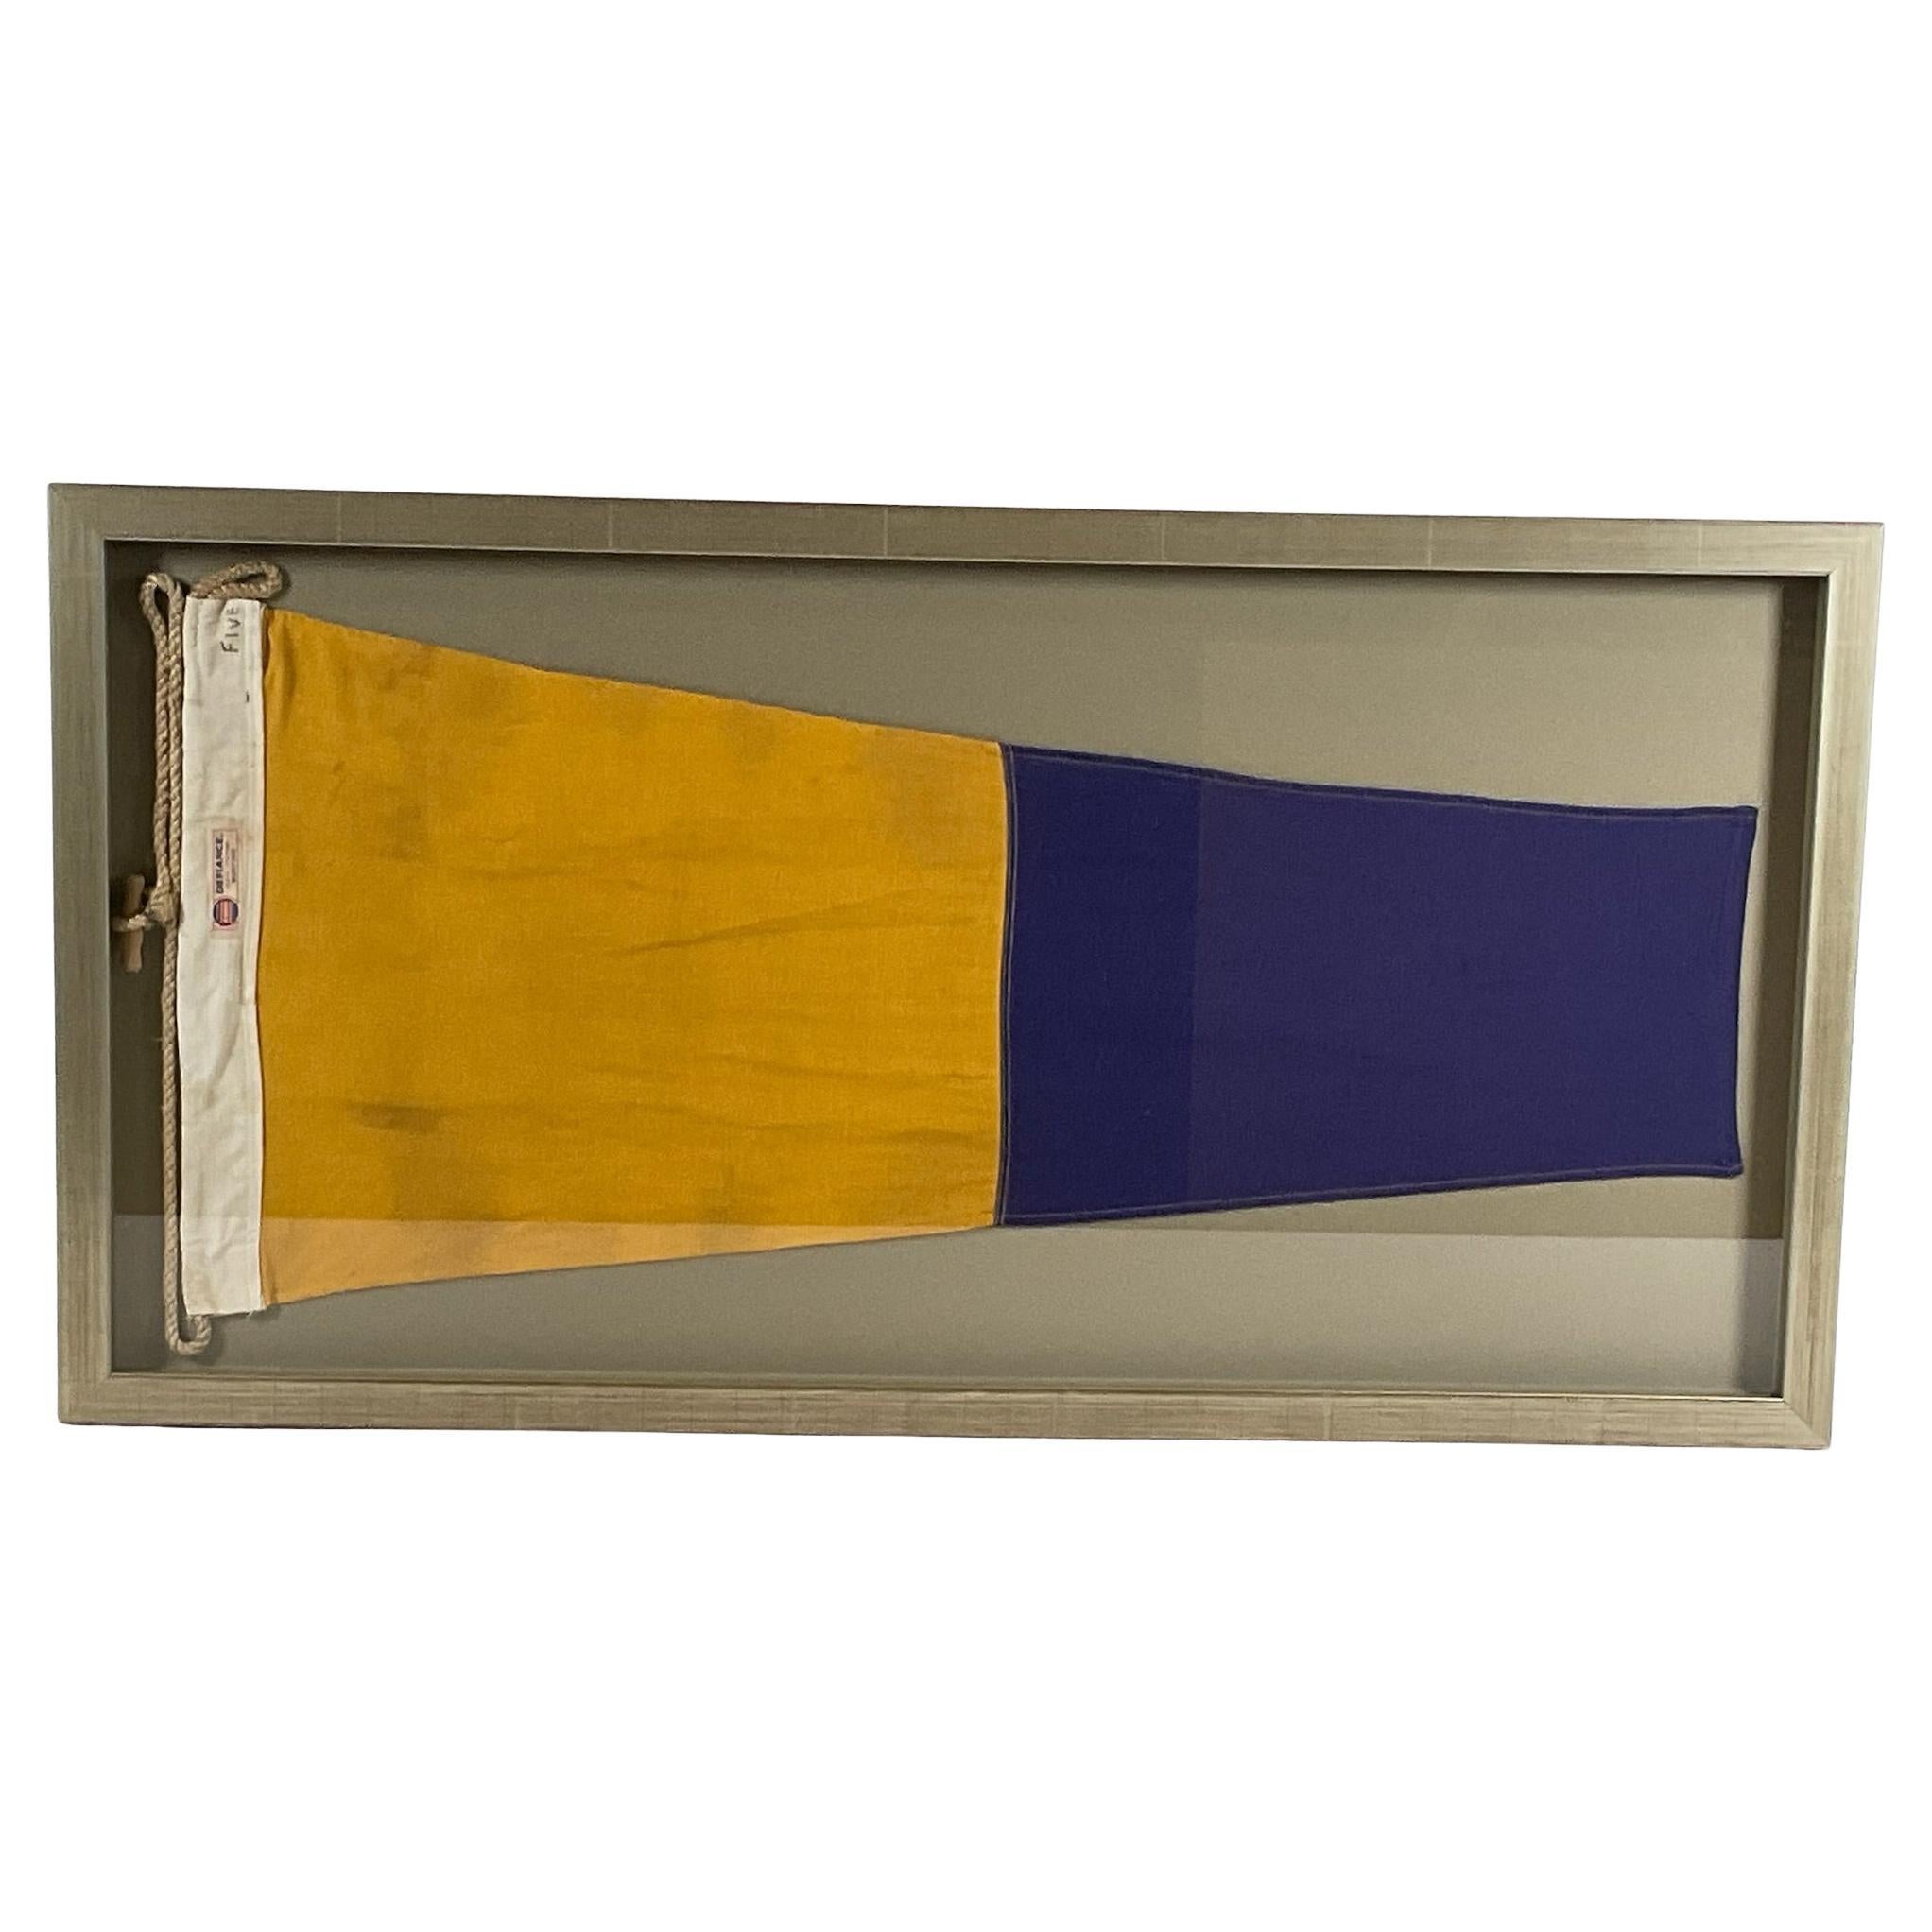 Large Maritime Signal Flag in Shadow Box Frame